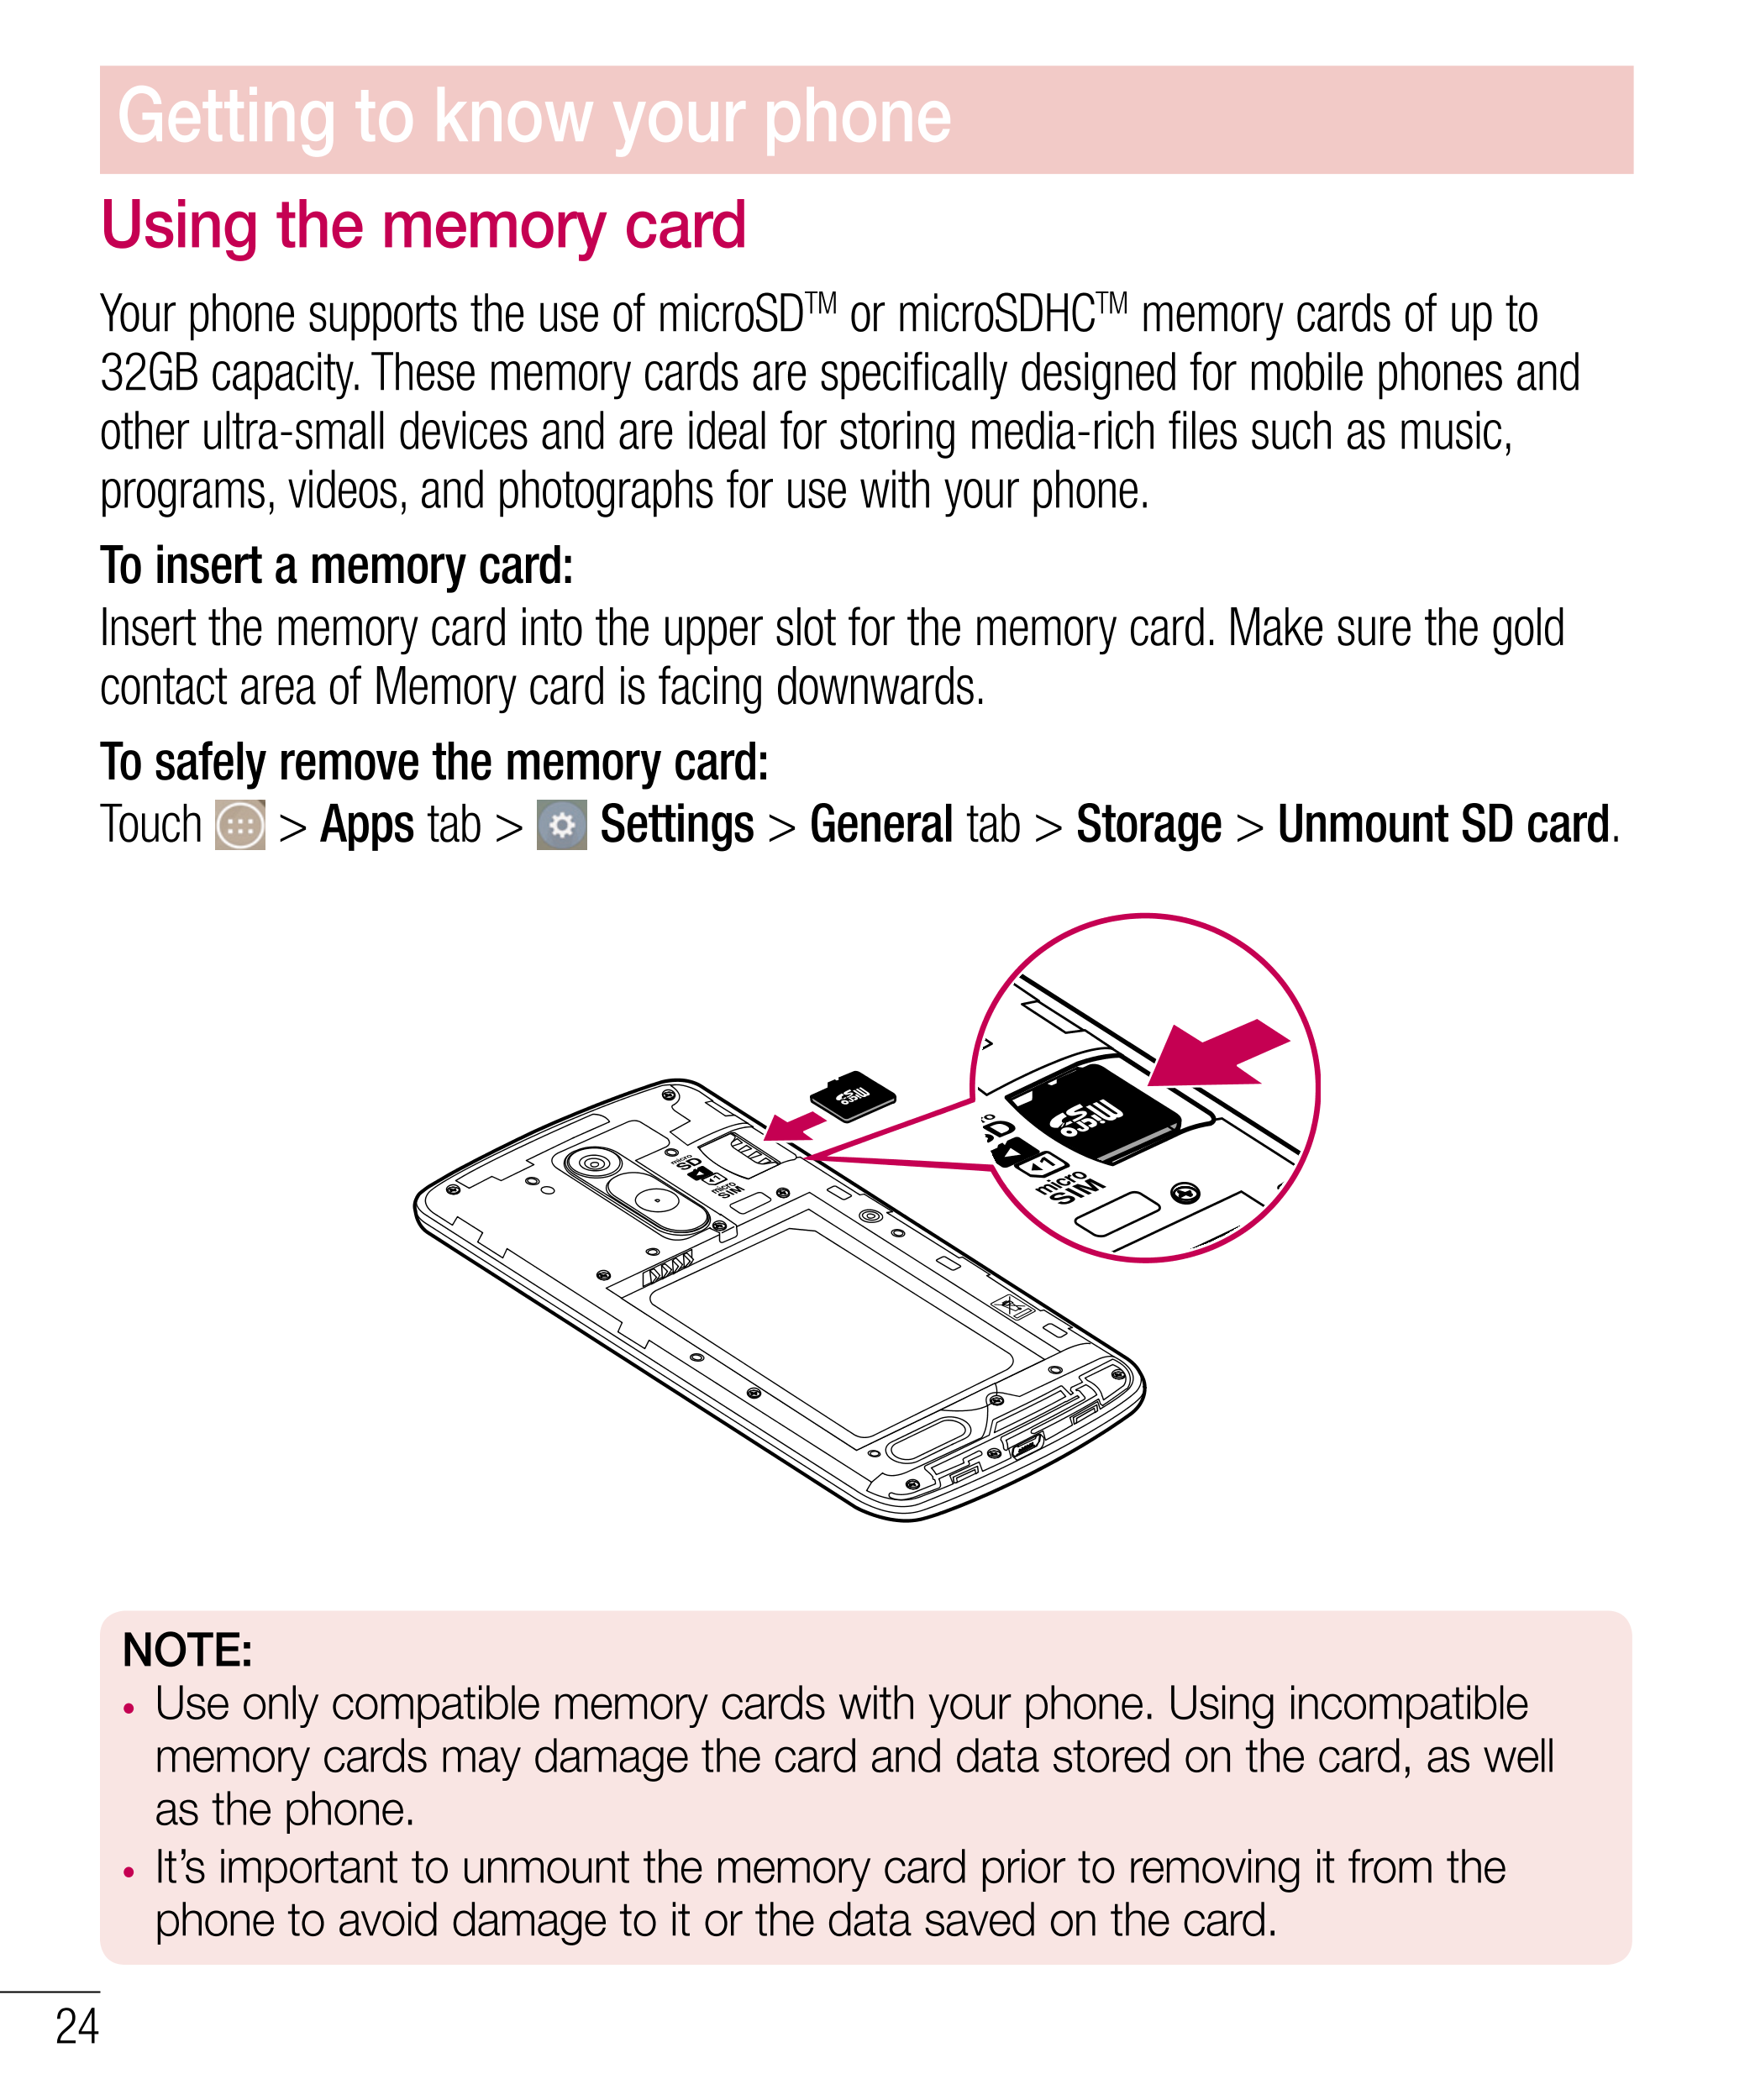 Getting to know your phone
Using the memory card
Your phone supports the use of microSDTM or microSDHCTM memory cards of up to 
